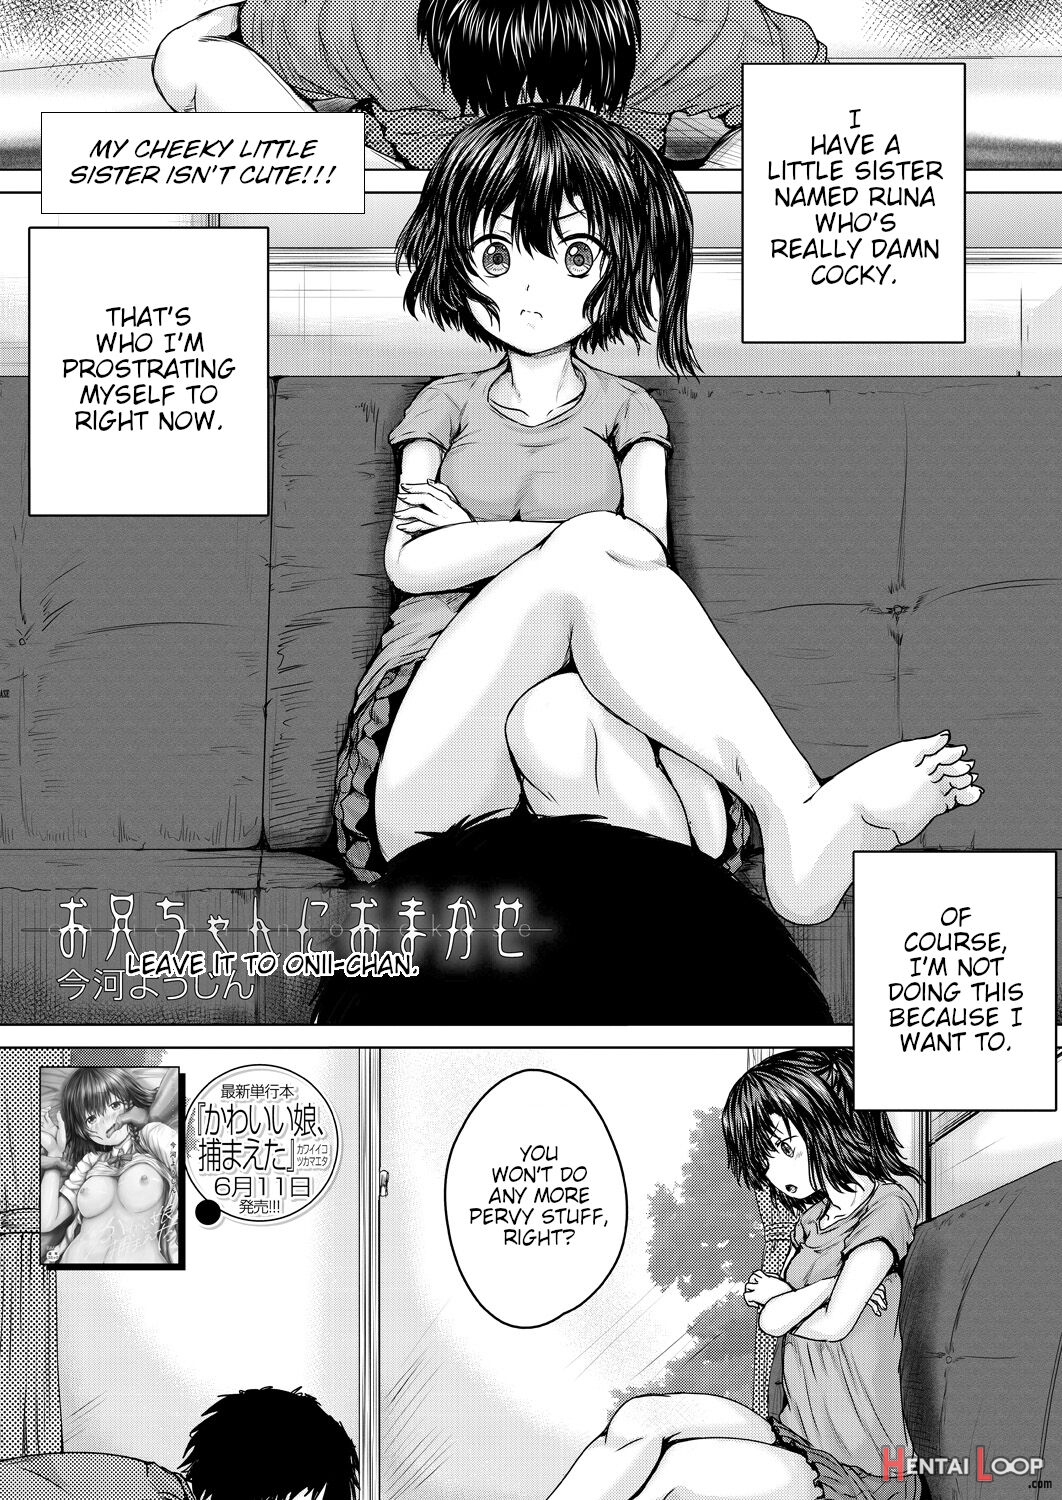 Leave It To Onii-chan Chapters 1-4 page 1